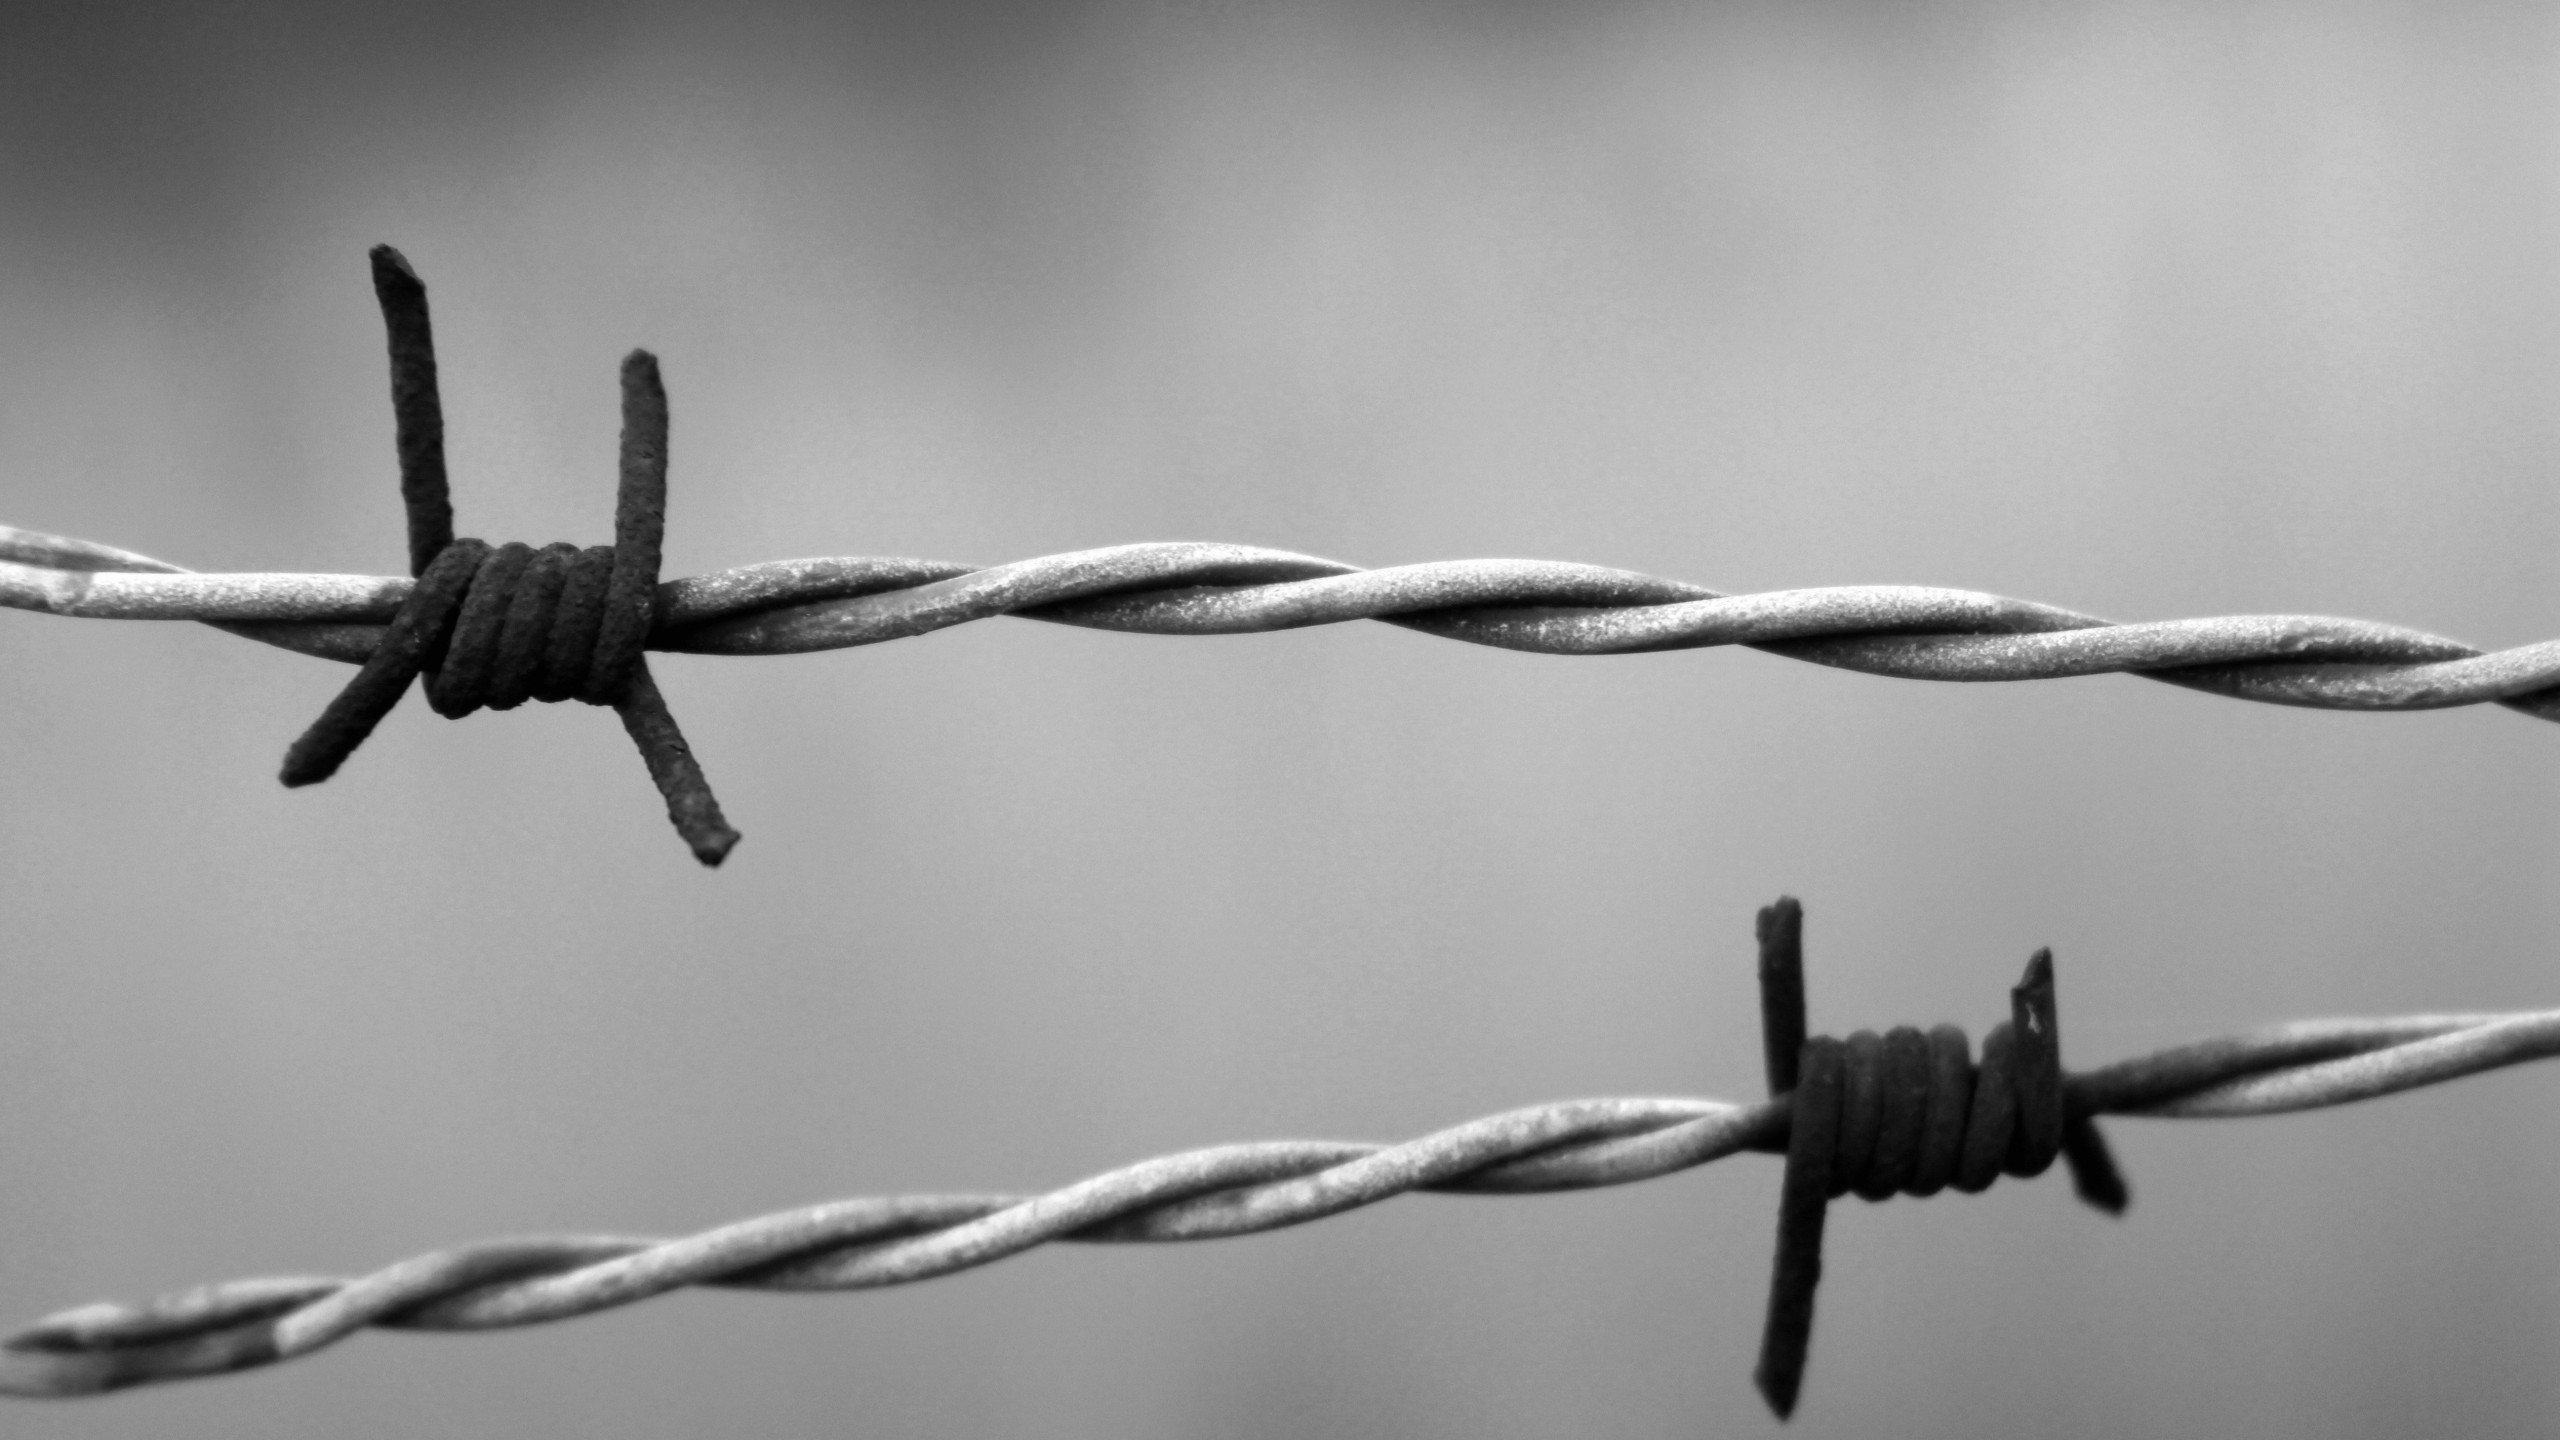 Barb Wire Wallpaper Background 54322 2560x1440 px ~ HDWallSource.com